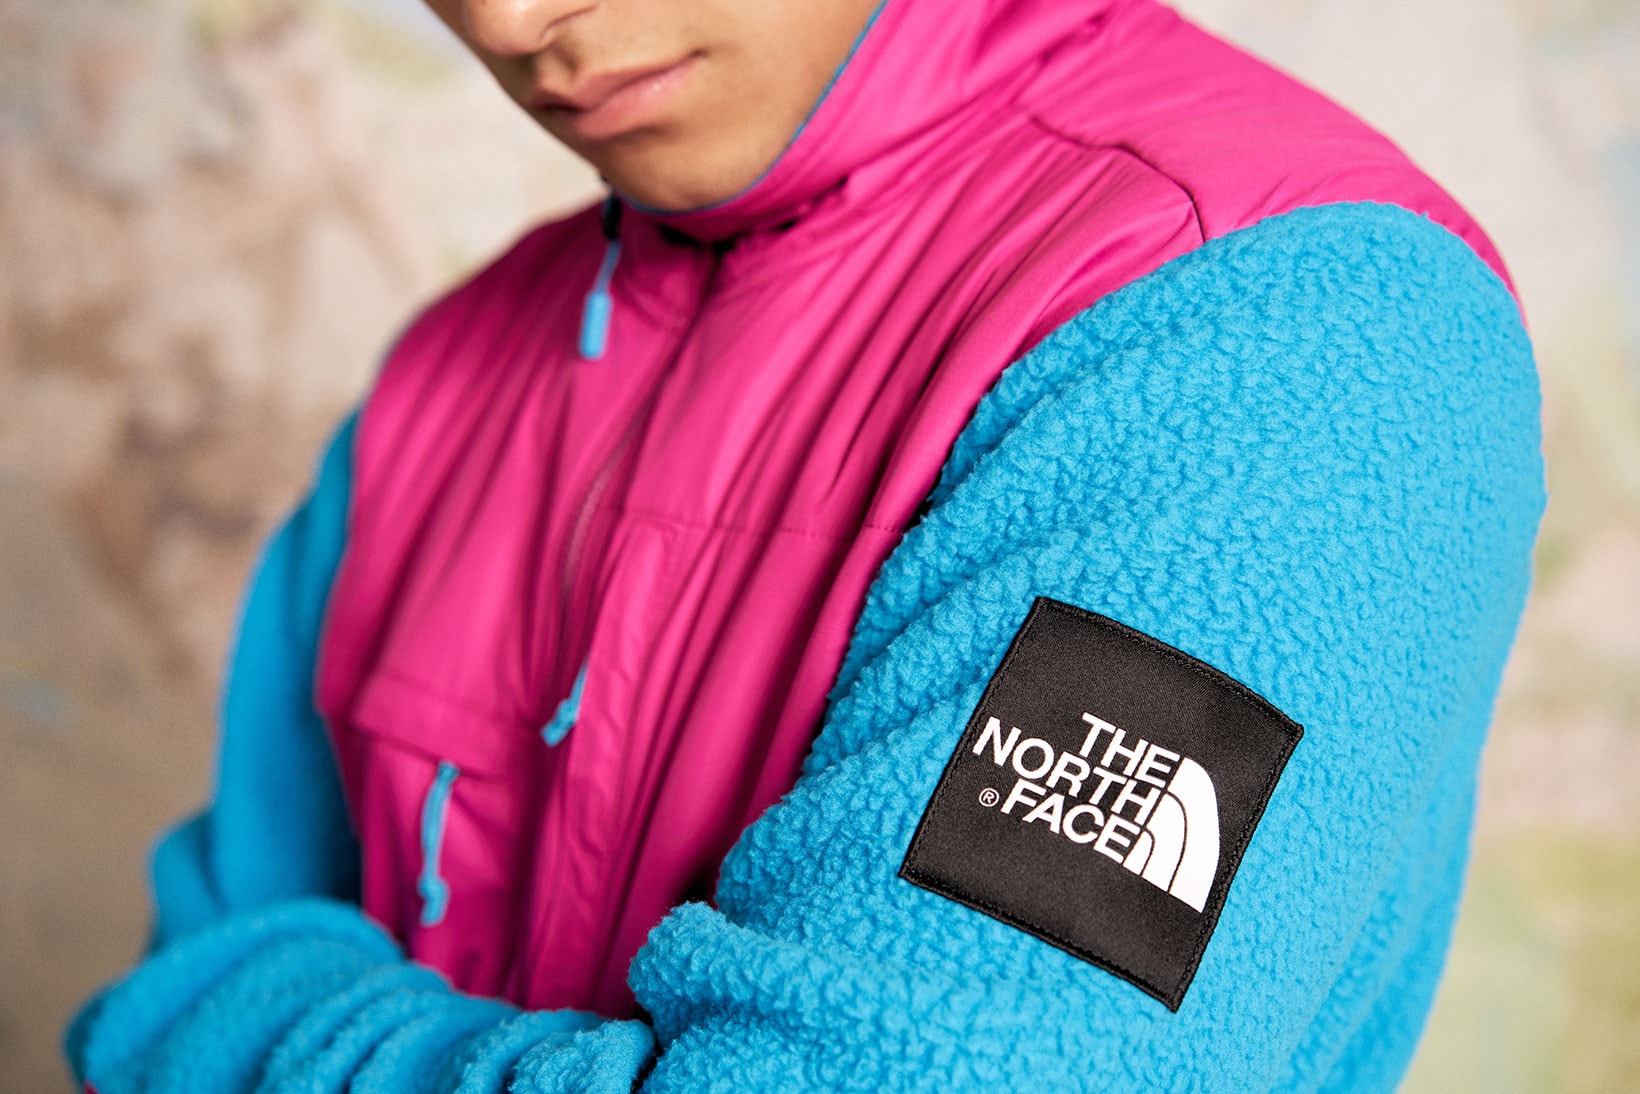 the north face back to trail collection retro 90s escape edge sneakers lhotse jackets denali fleece pink blue